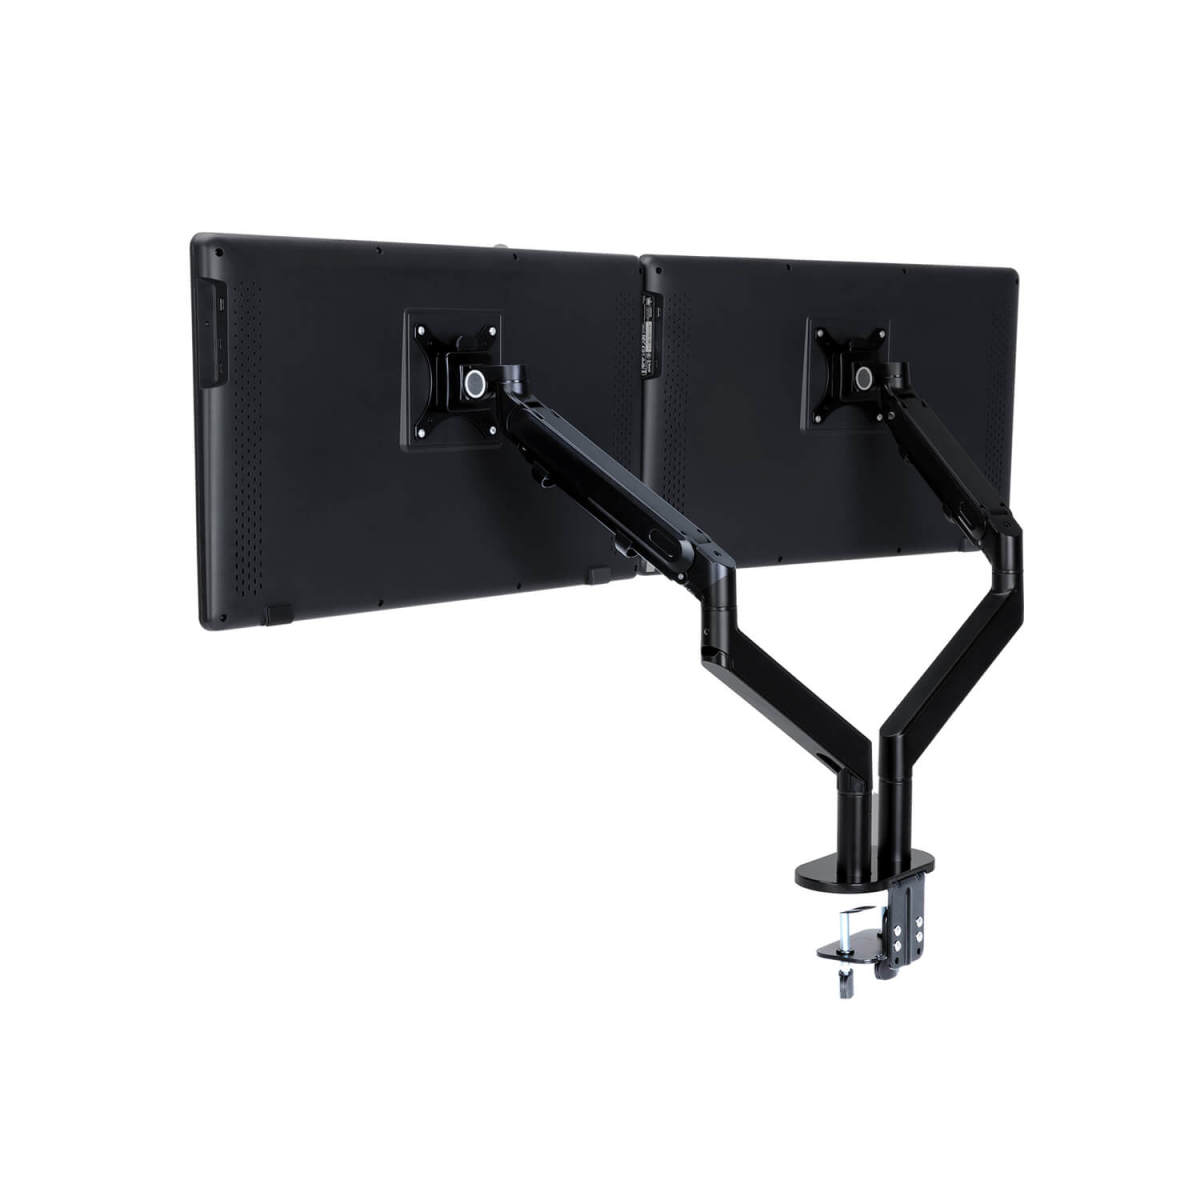 Huion Dual Monitor Arm ST420  Huion Official Store: Drawing Tablets, Pen  Tablets, Pen Display, Led Light Pad